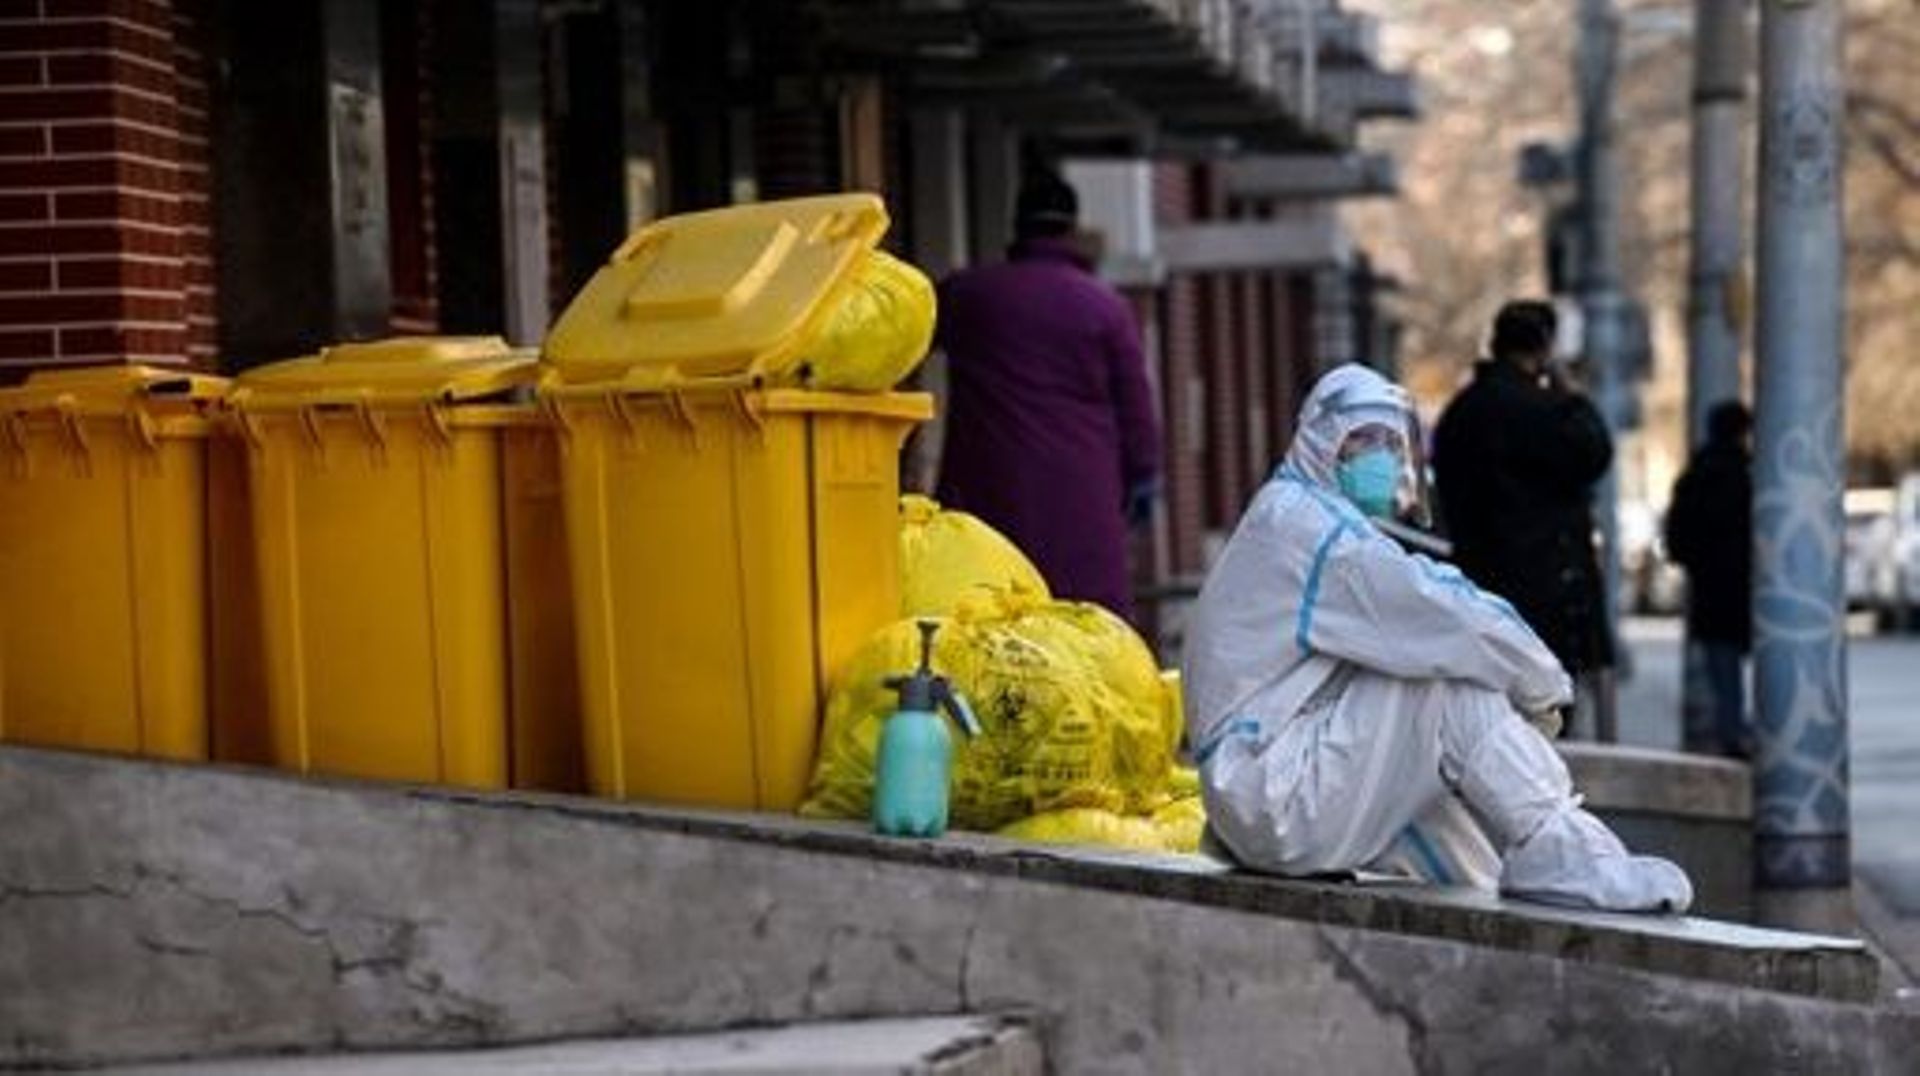 A worker wearing personal protective equipment (PPE) sits next to waste material outside a fever clinic amid the Covid-19 pandemic in Beijing on December 19, 2022.  Noel CELIS / AFP